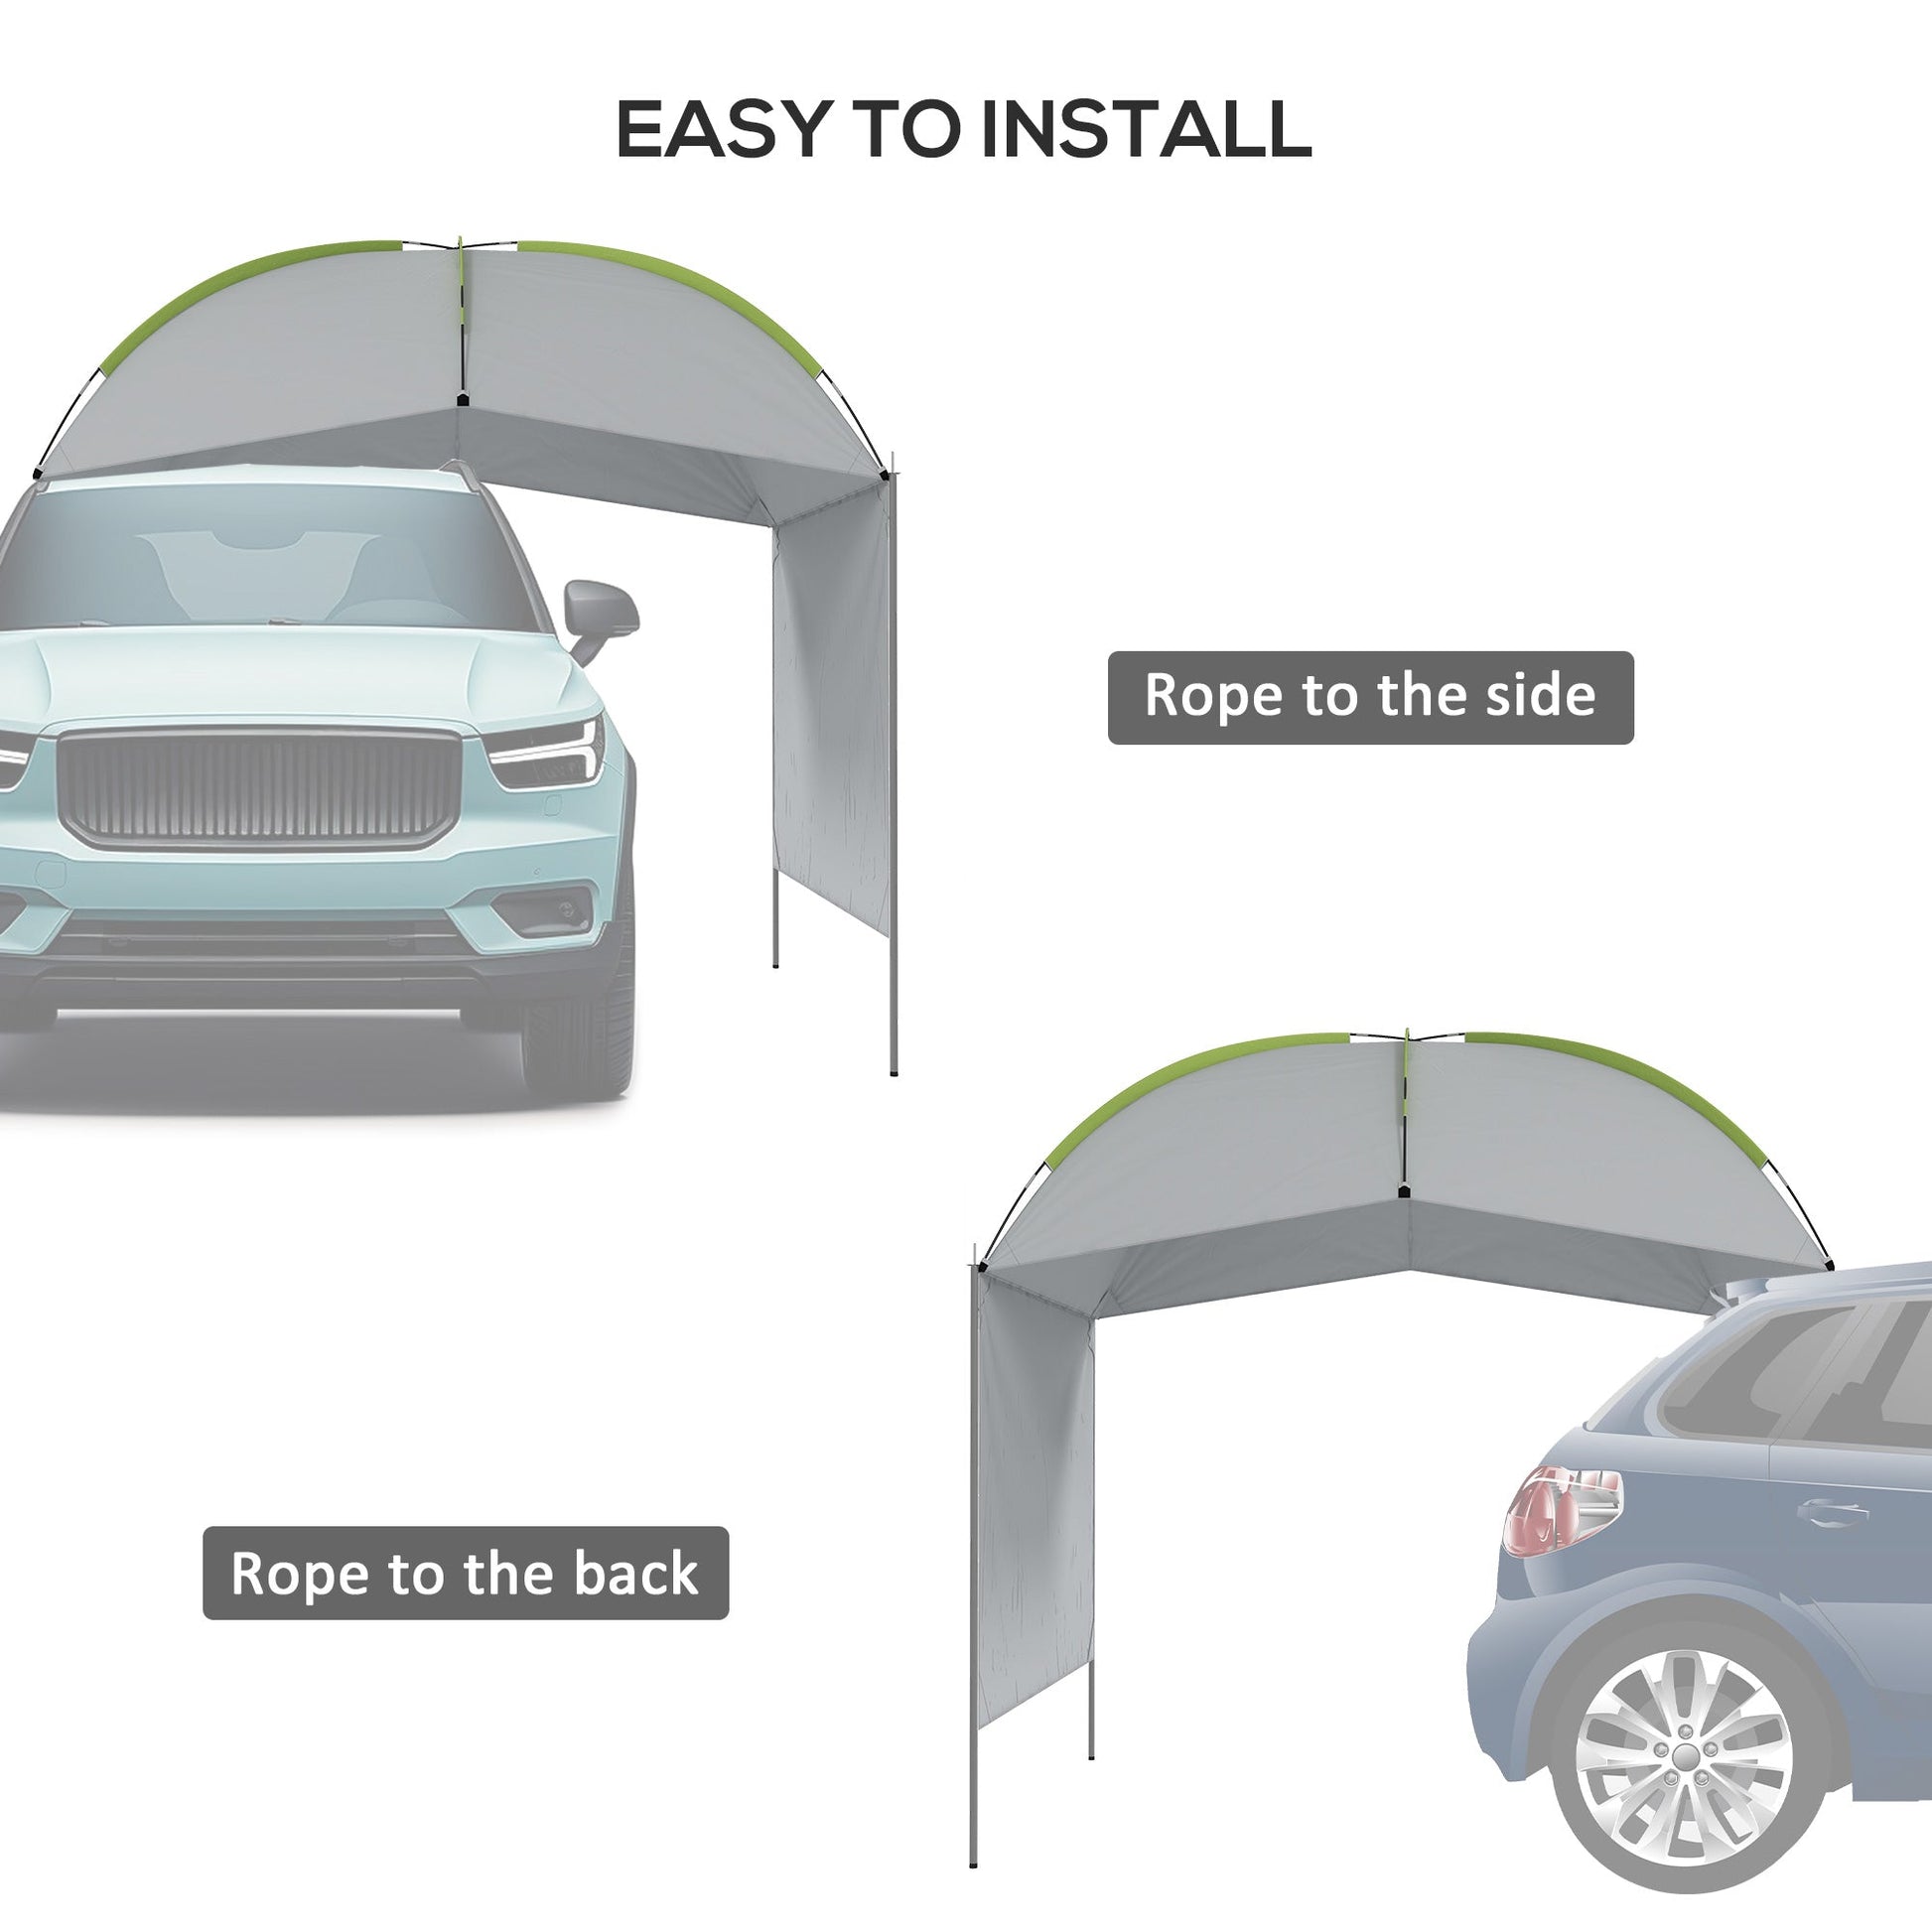 SUV Awning Tailgate Tent, Portable Car Awning with Side Wall, for Truck, RV, Van, Trailer and Overlanding Camping at Gallery Canada